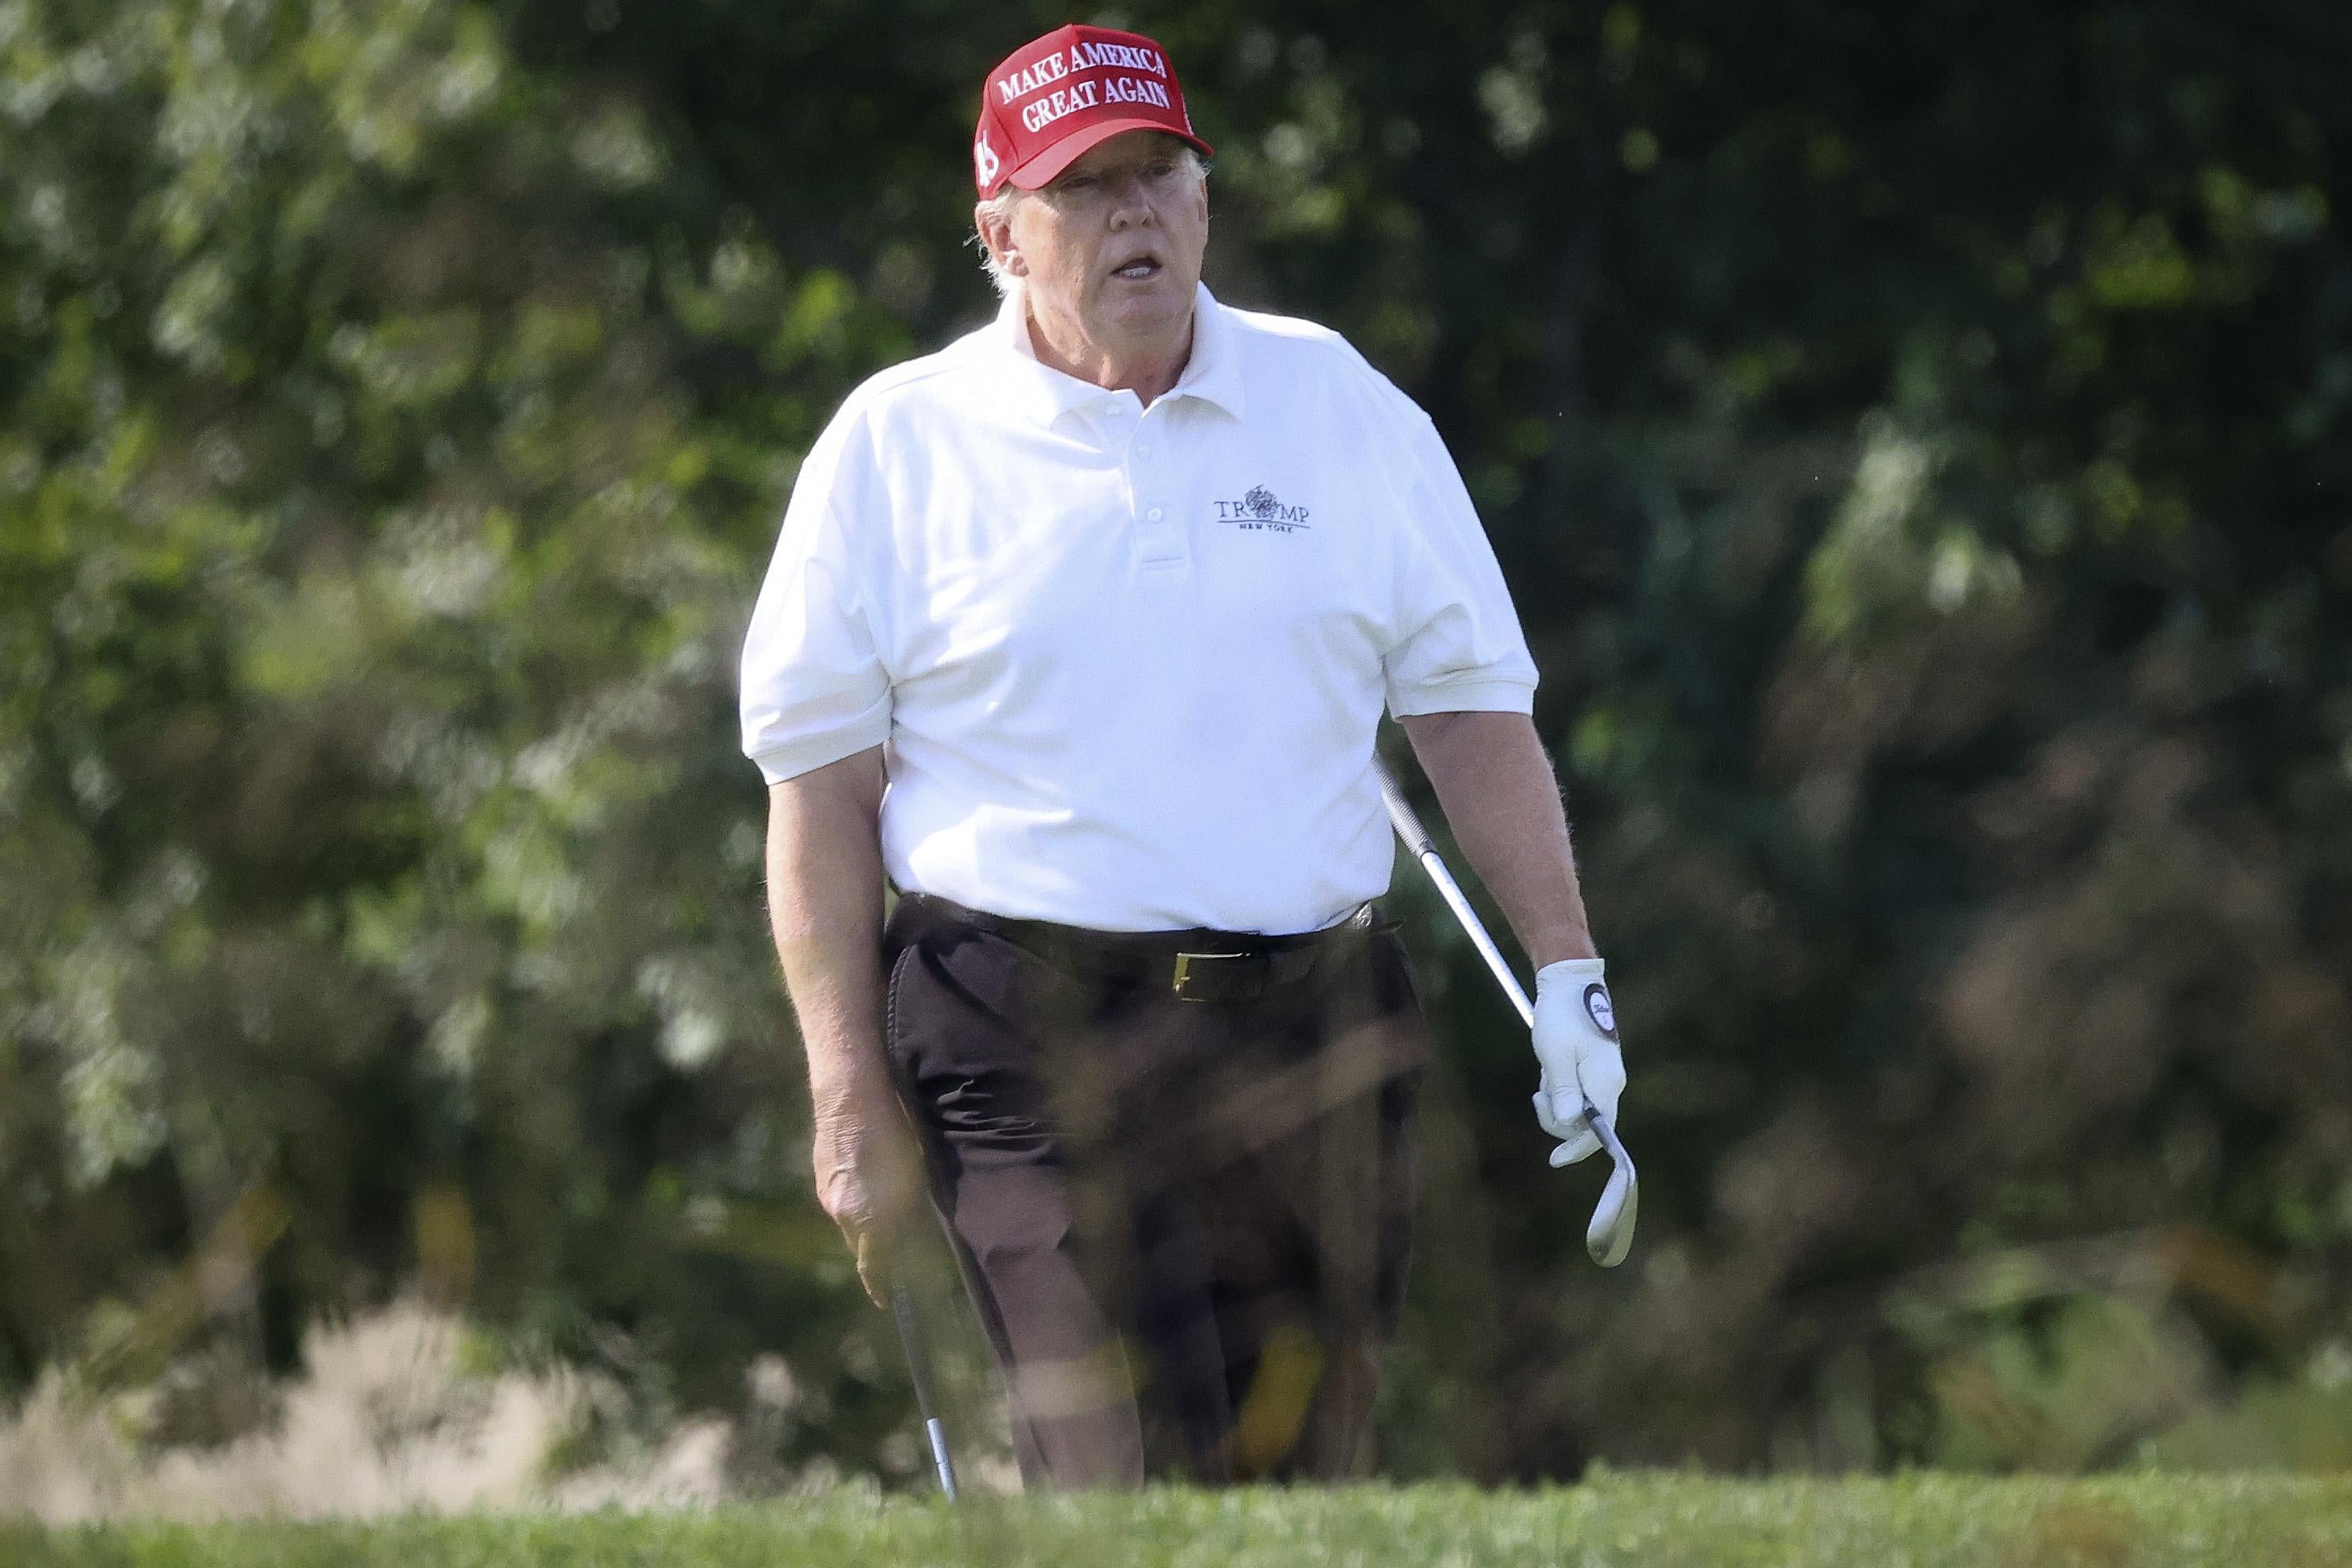 Trump looking pale and heavy wears a red MAGA hat.